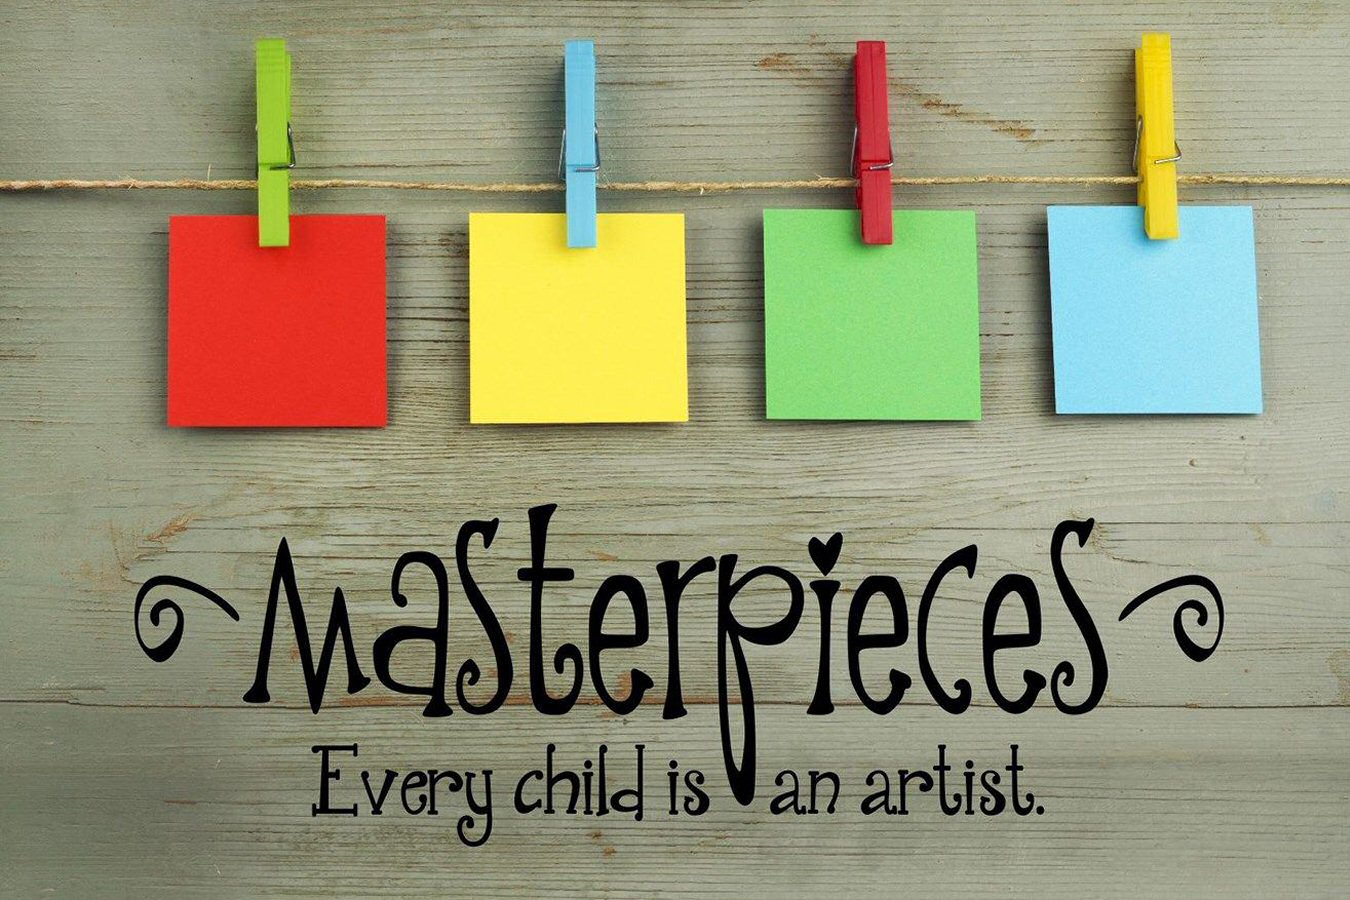 Every child is an artist